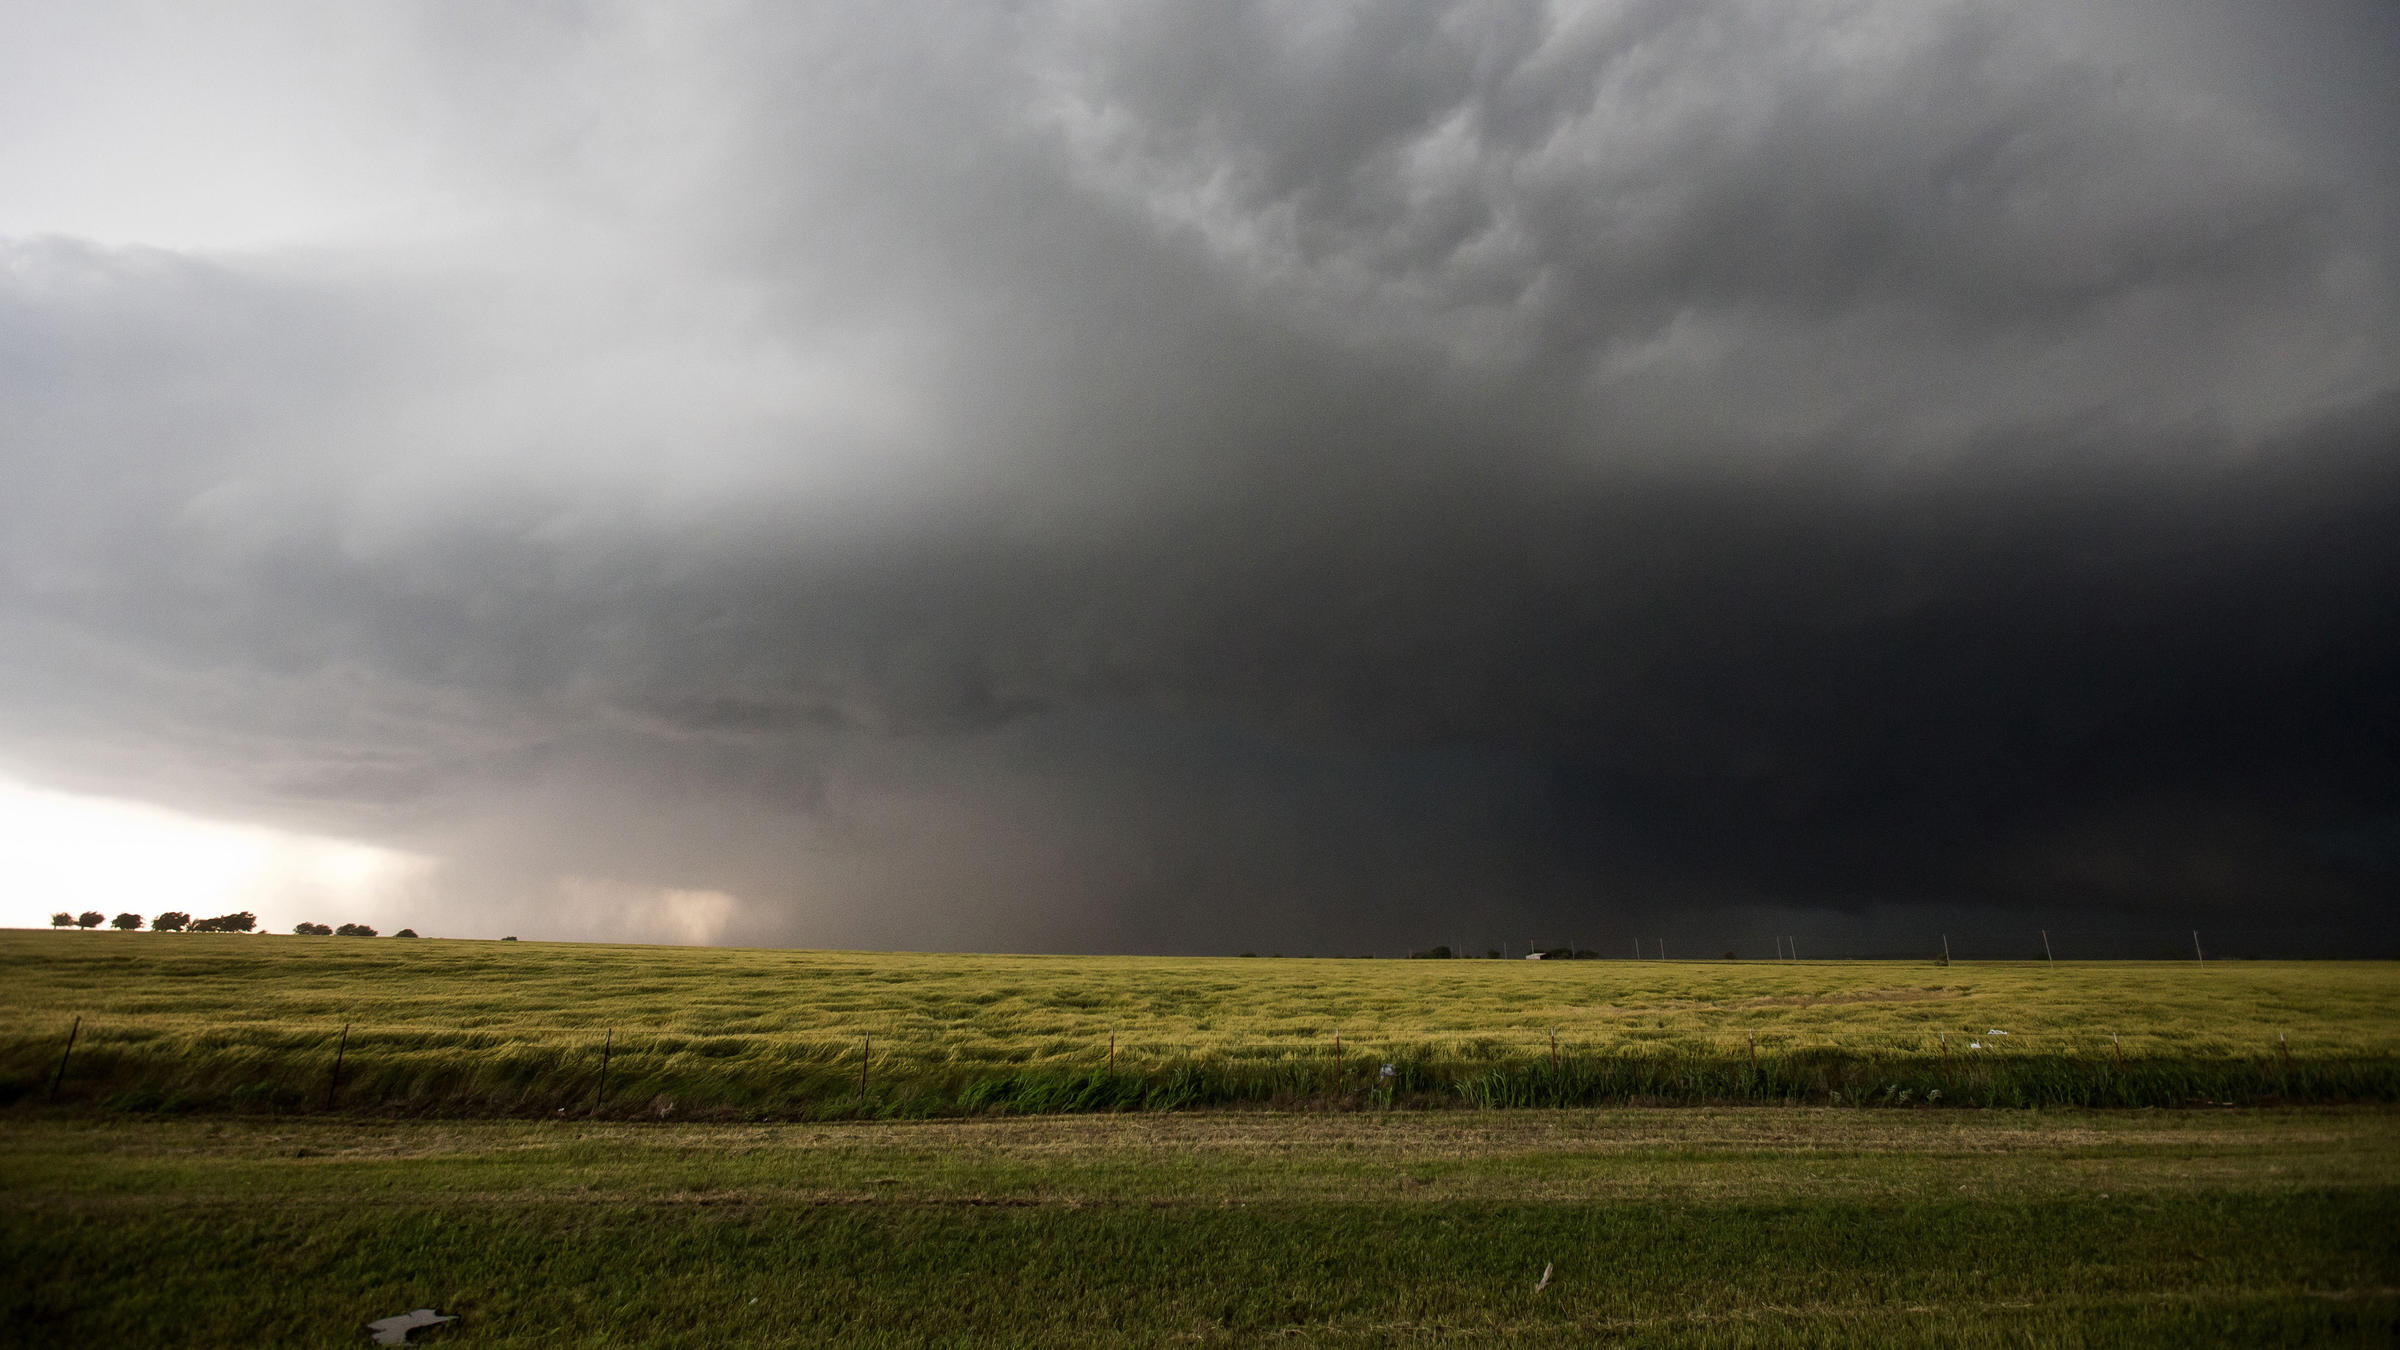 Why Chase Tornadoes? To Save Lives, Not To 'Die Ourselves' | St. Louis ...